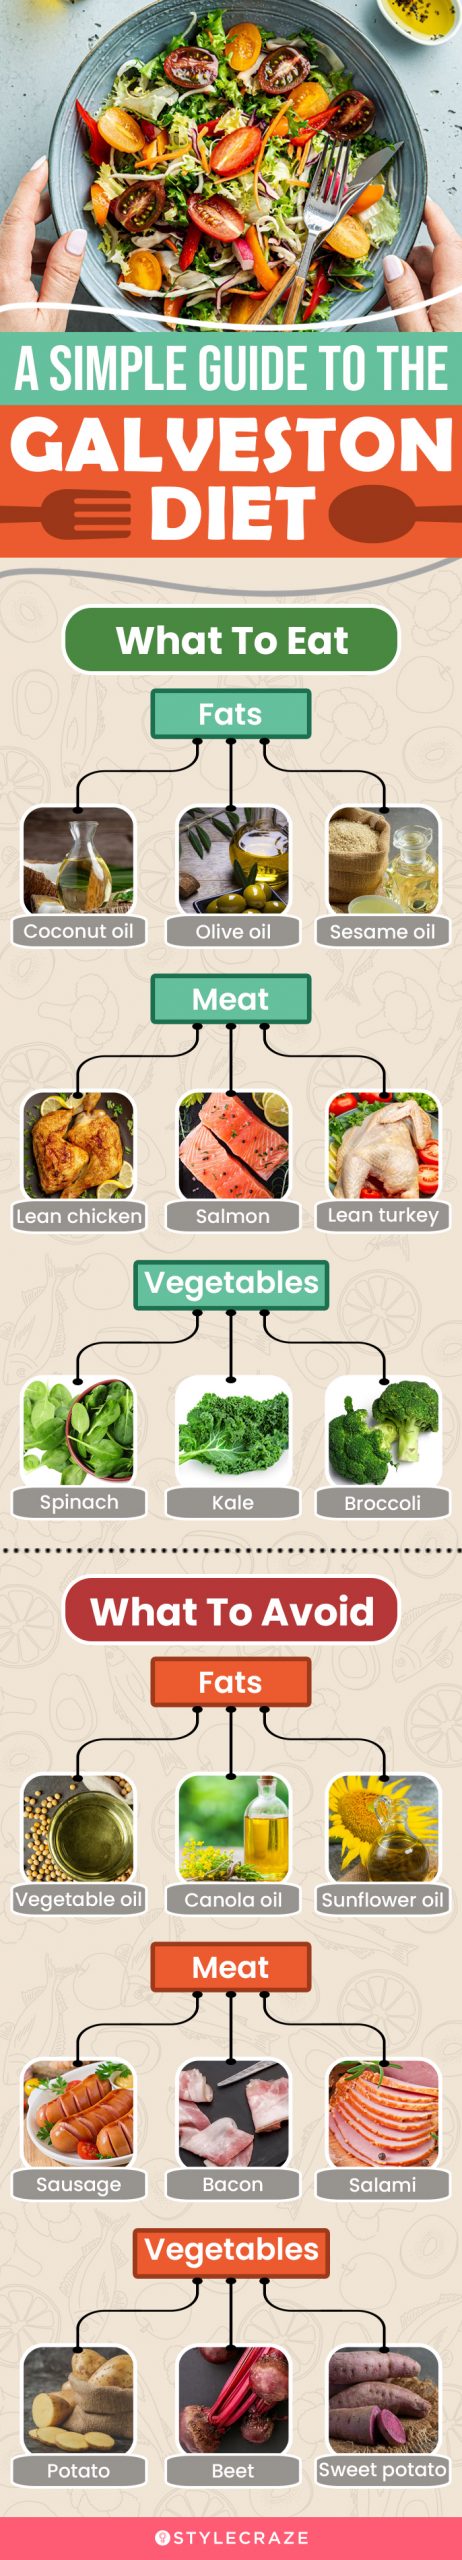 a simple guide to the galveston diet (infographic)